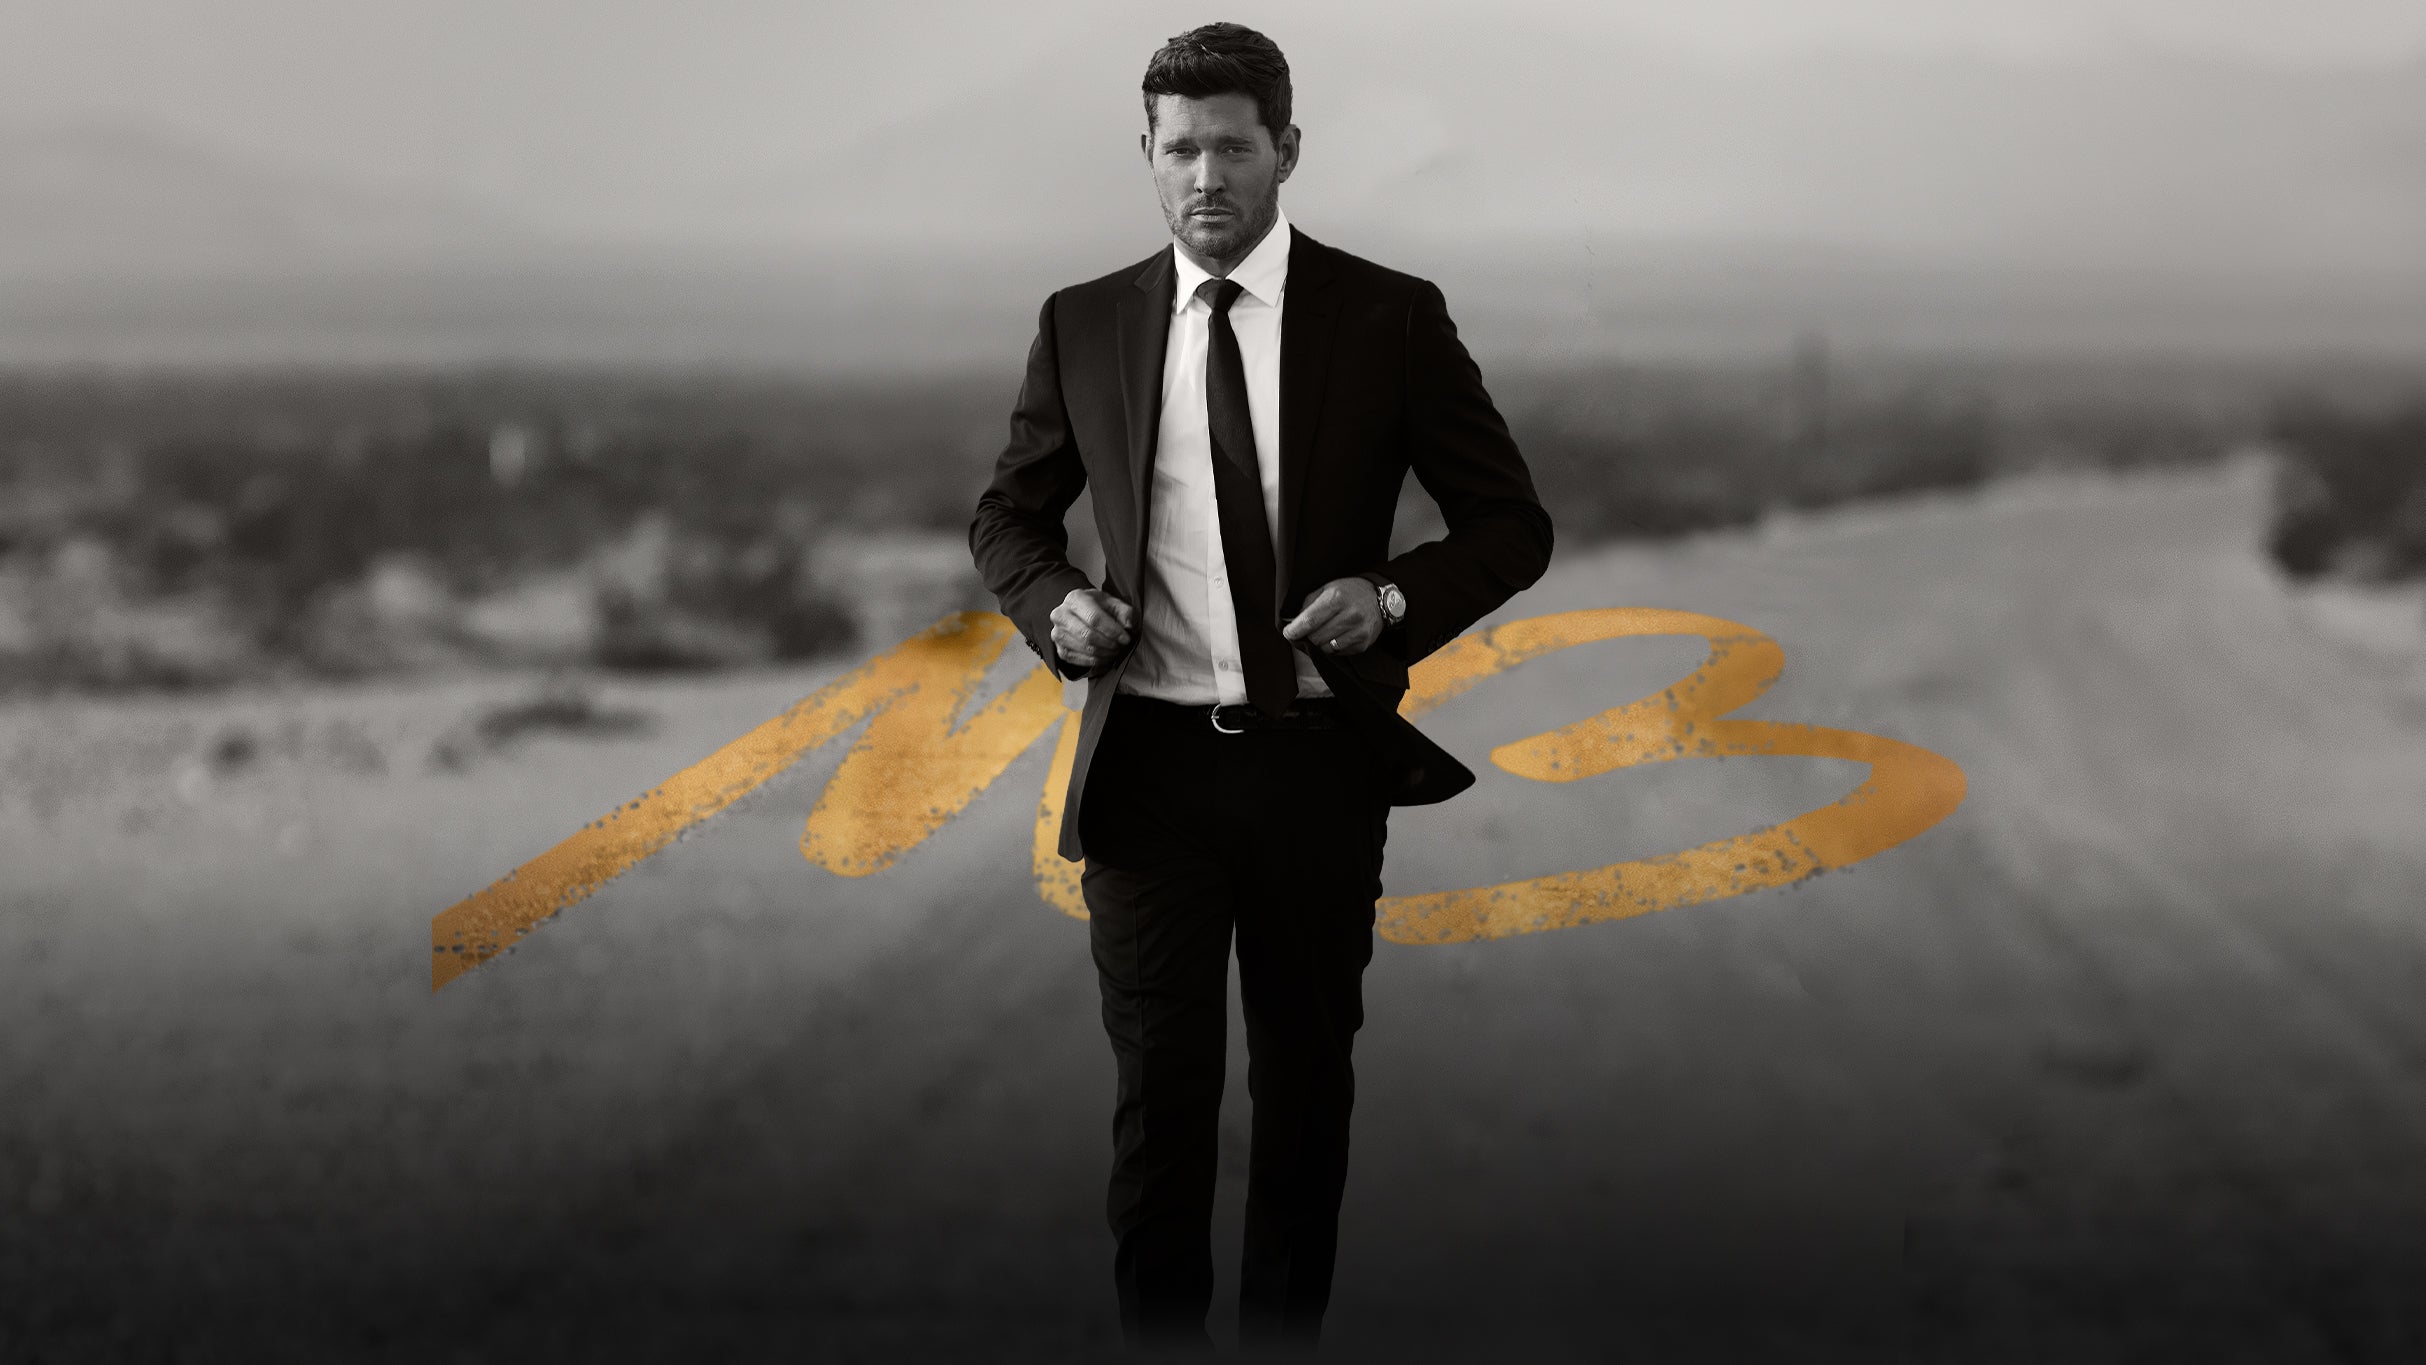 An Evening with Michael Bublé at AT&T Center